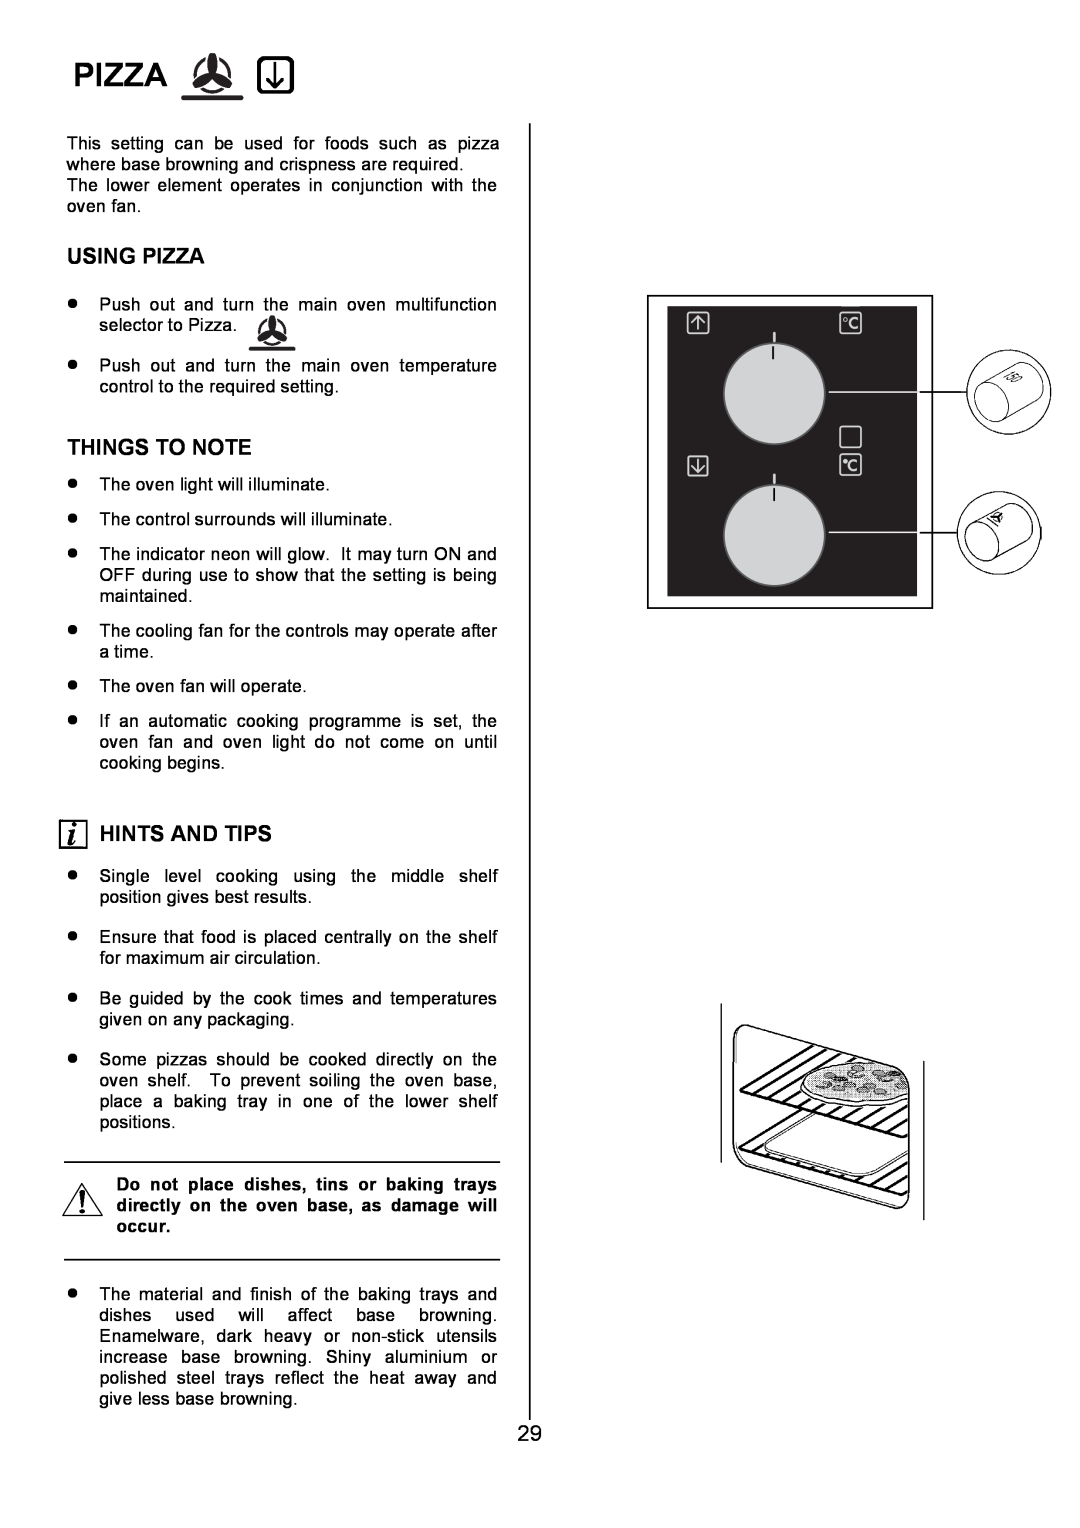 Electrolux U7101-4 operating instructions Using Pizza, Things To Note, Hints And Tips 